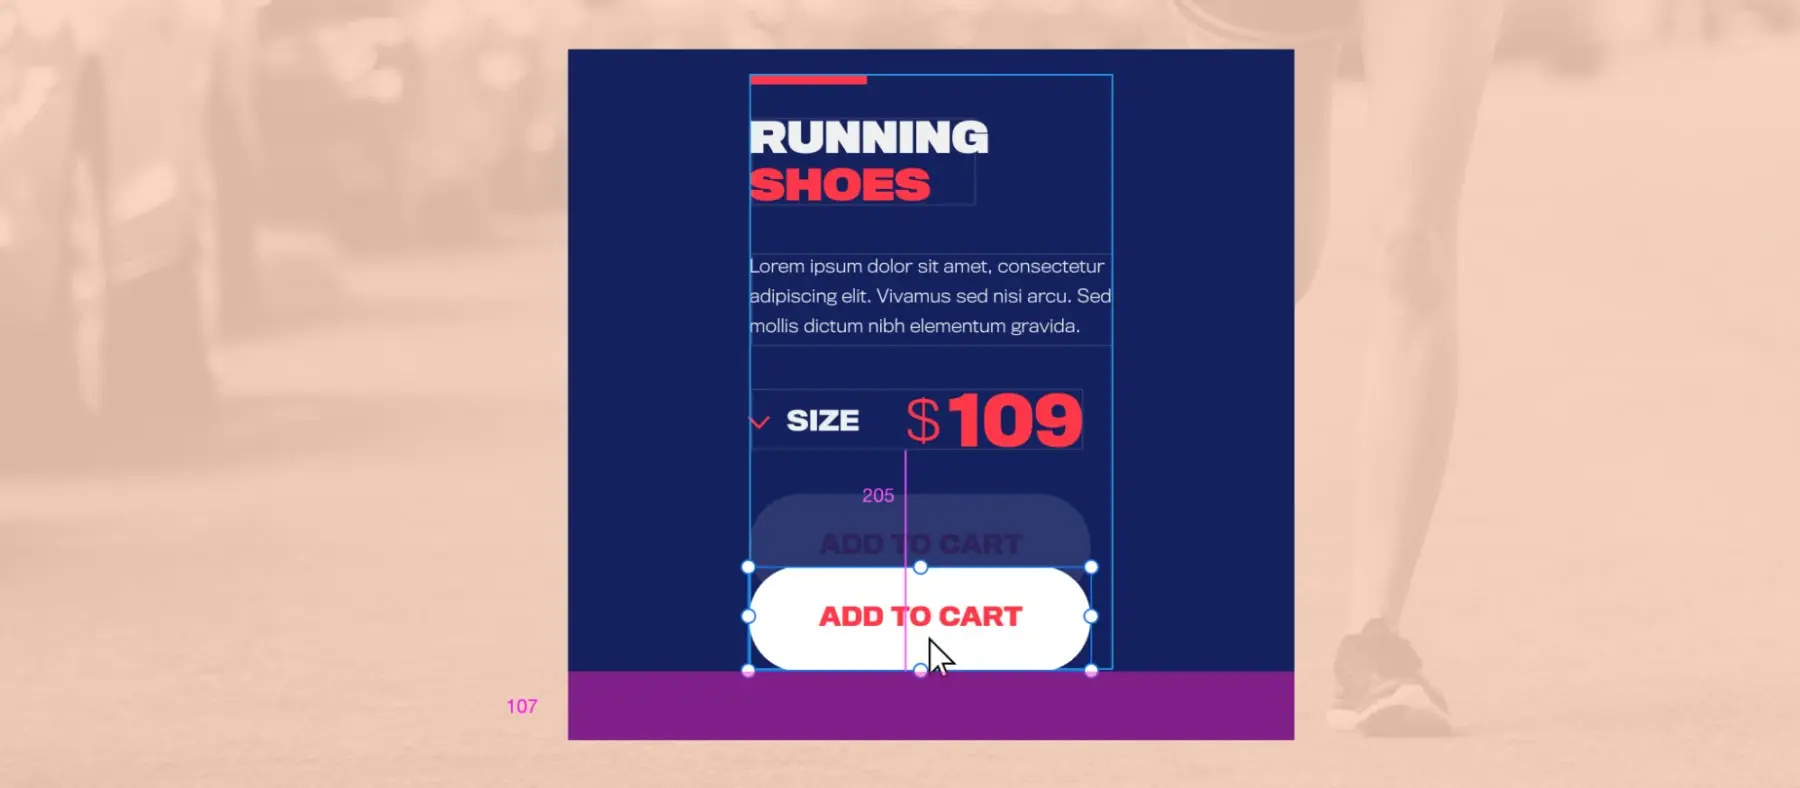 Image showing the new content aware layout using a sample running shoe advertisement.